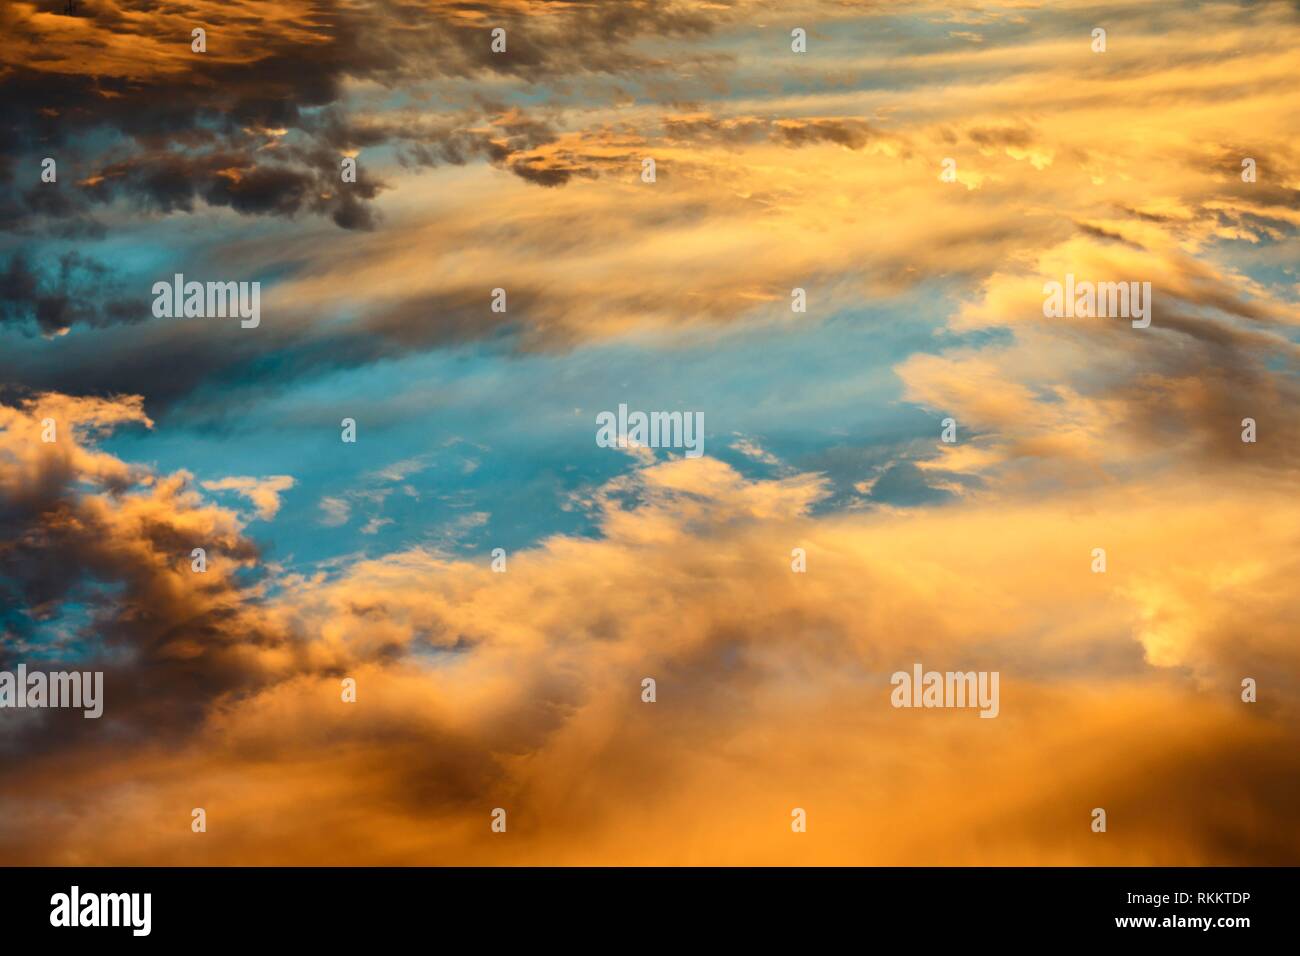 Colorful Heavenly Orange Warm Clouds On Sky at Sunset. Stock Photo